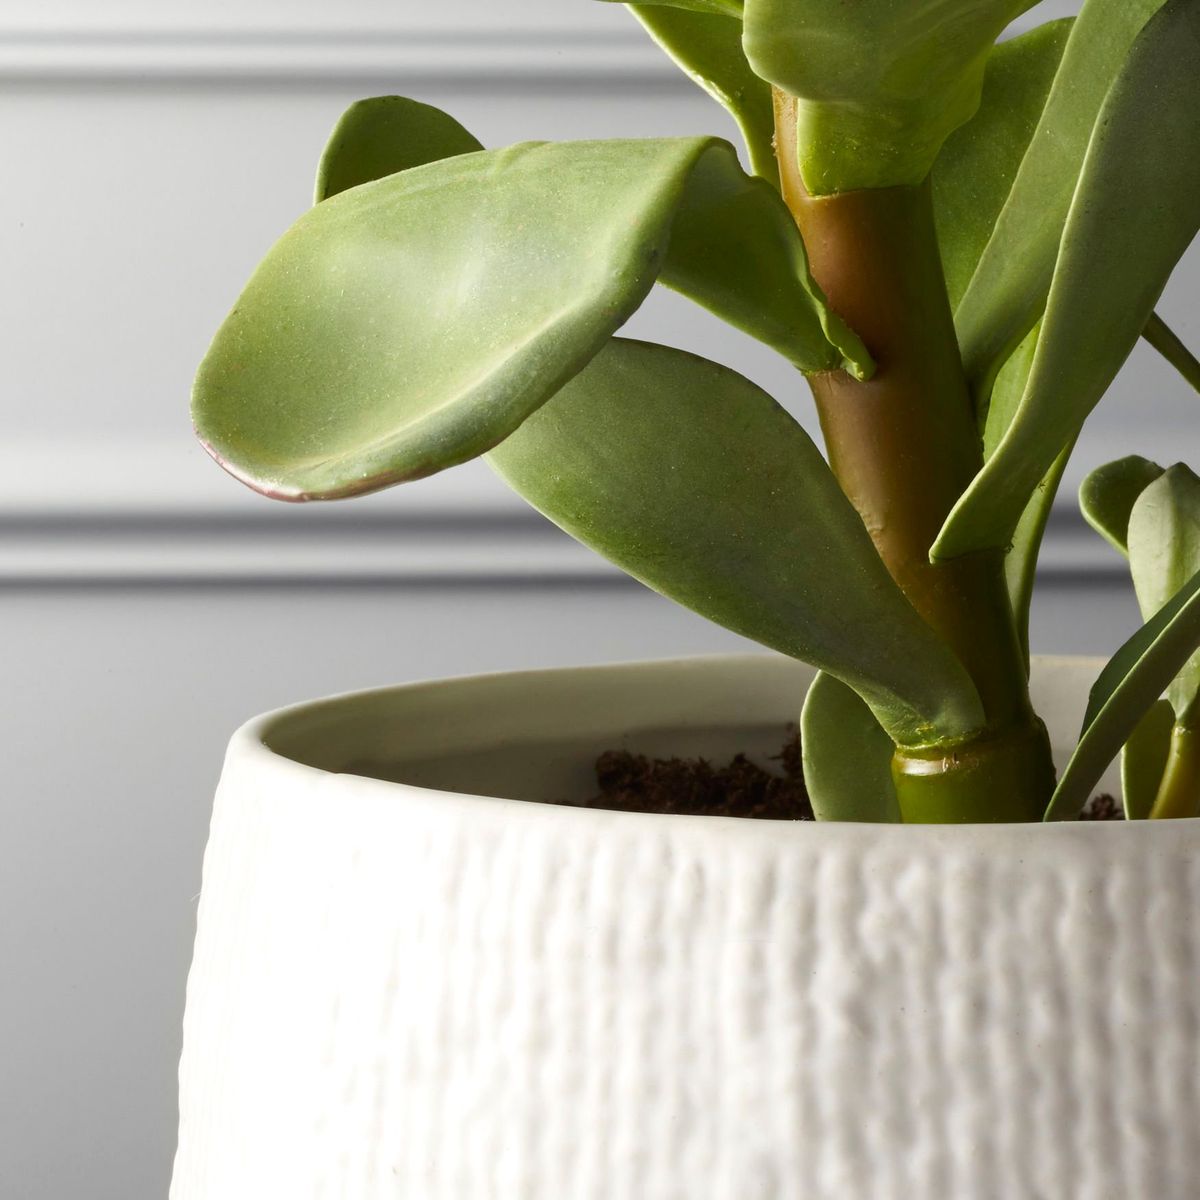 How to Decorate With Fake Plants (And Where to Find the Best Faux